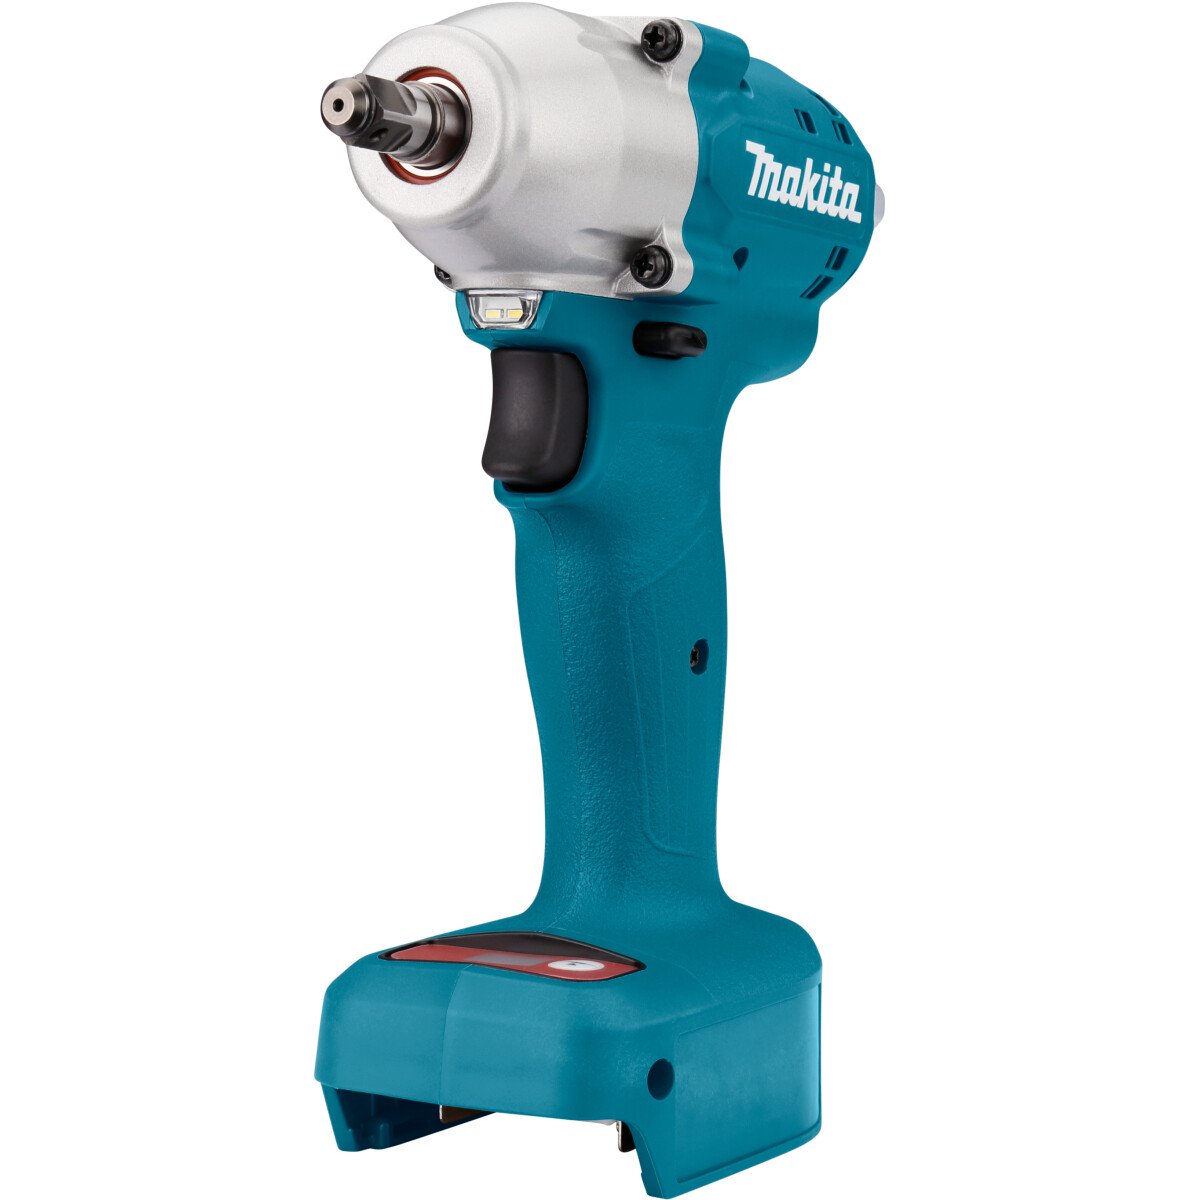 Makita DTWA100Z Body Only 14.4V Brushless Impact Wrench